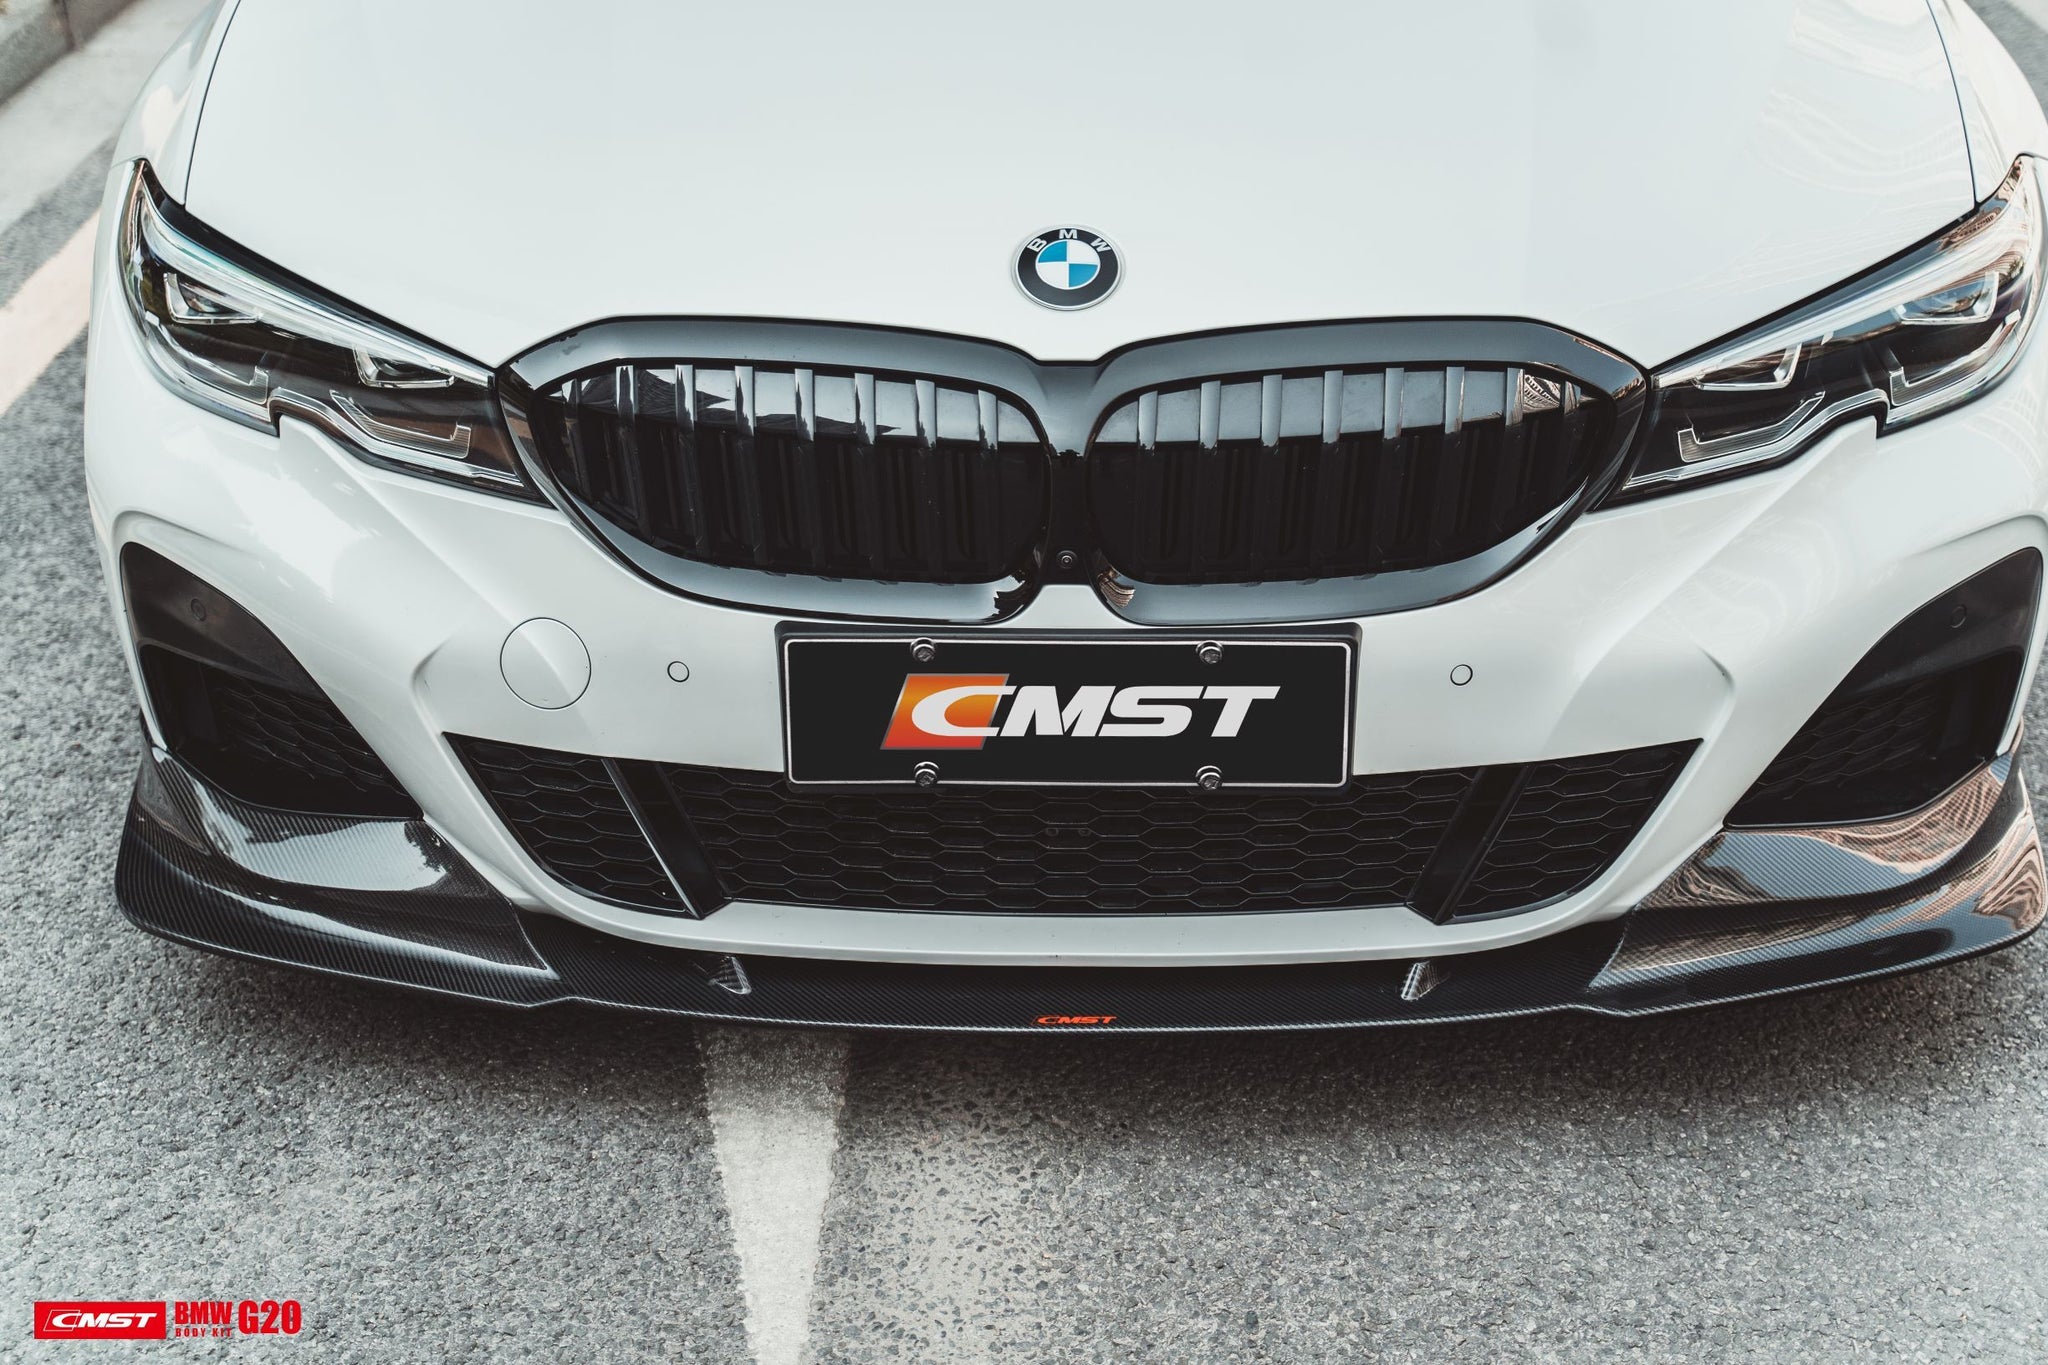 Check our price and buy CMST Carbon Fiber Body Kit set for BMW 3 Series G20 / G21!